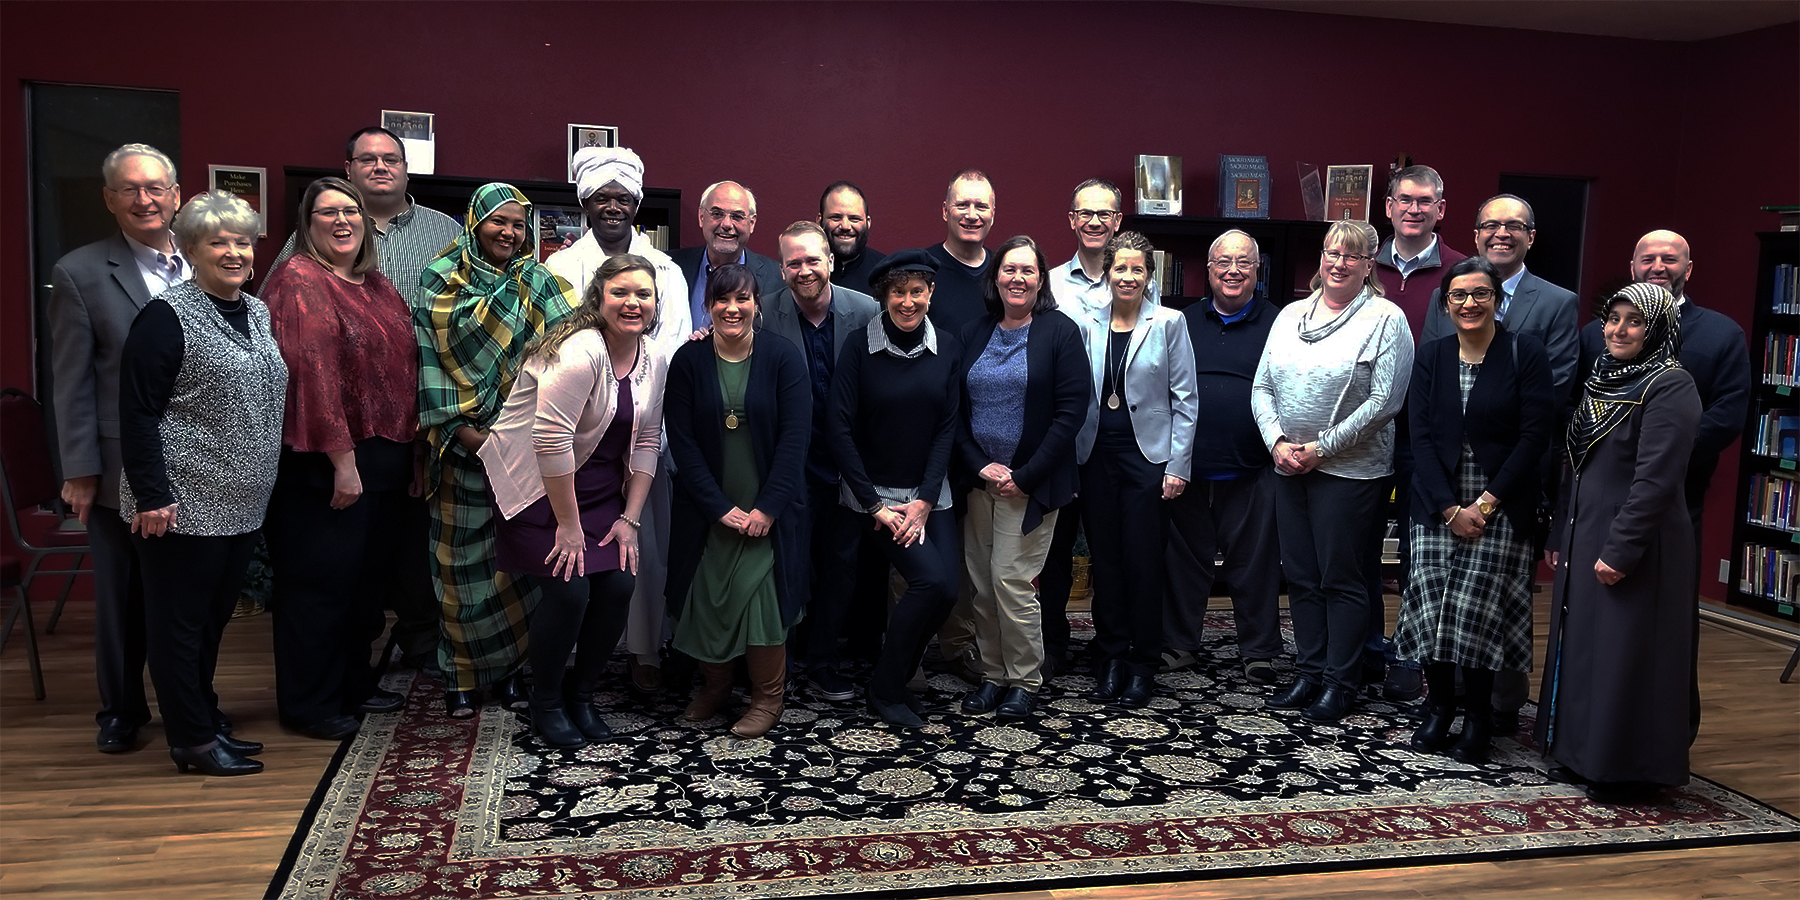 Members of the Magic Valley Interreligious Dialogue group at a recent dinner with their spouses in Twin Falls, Idaho. Photo provided.